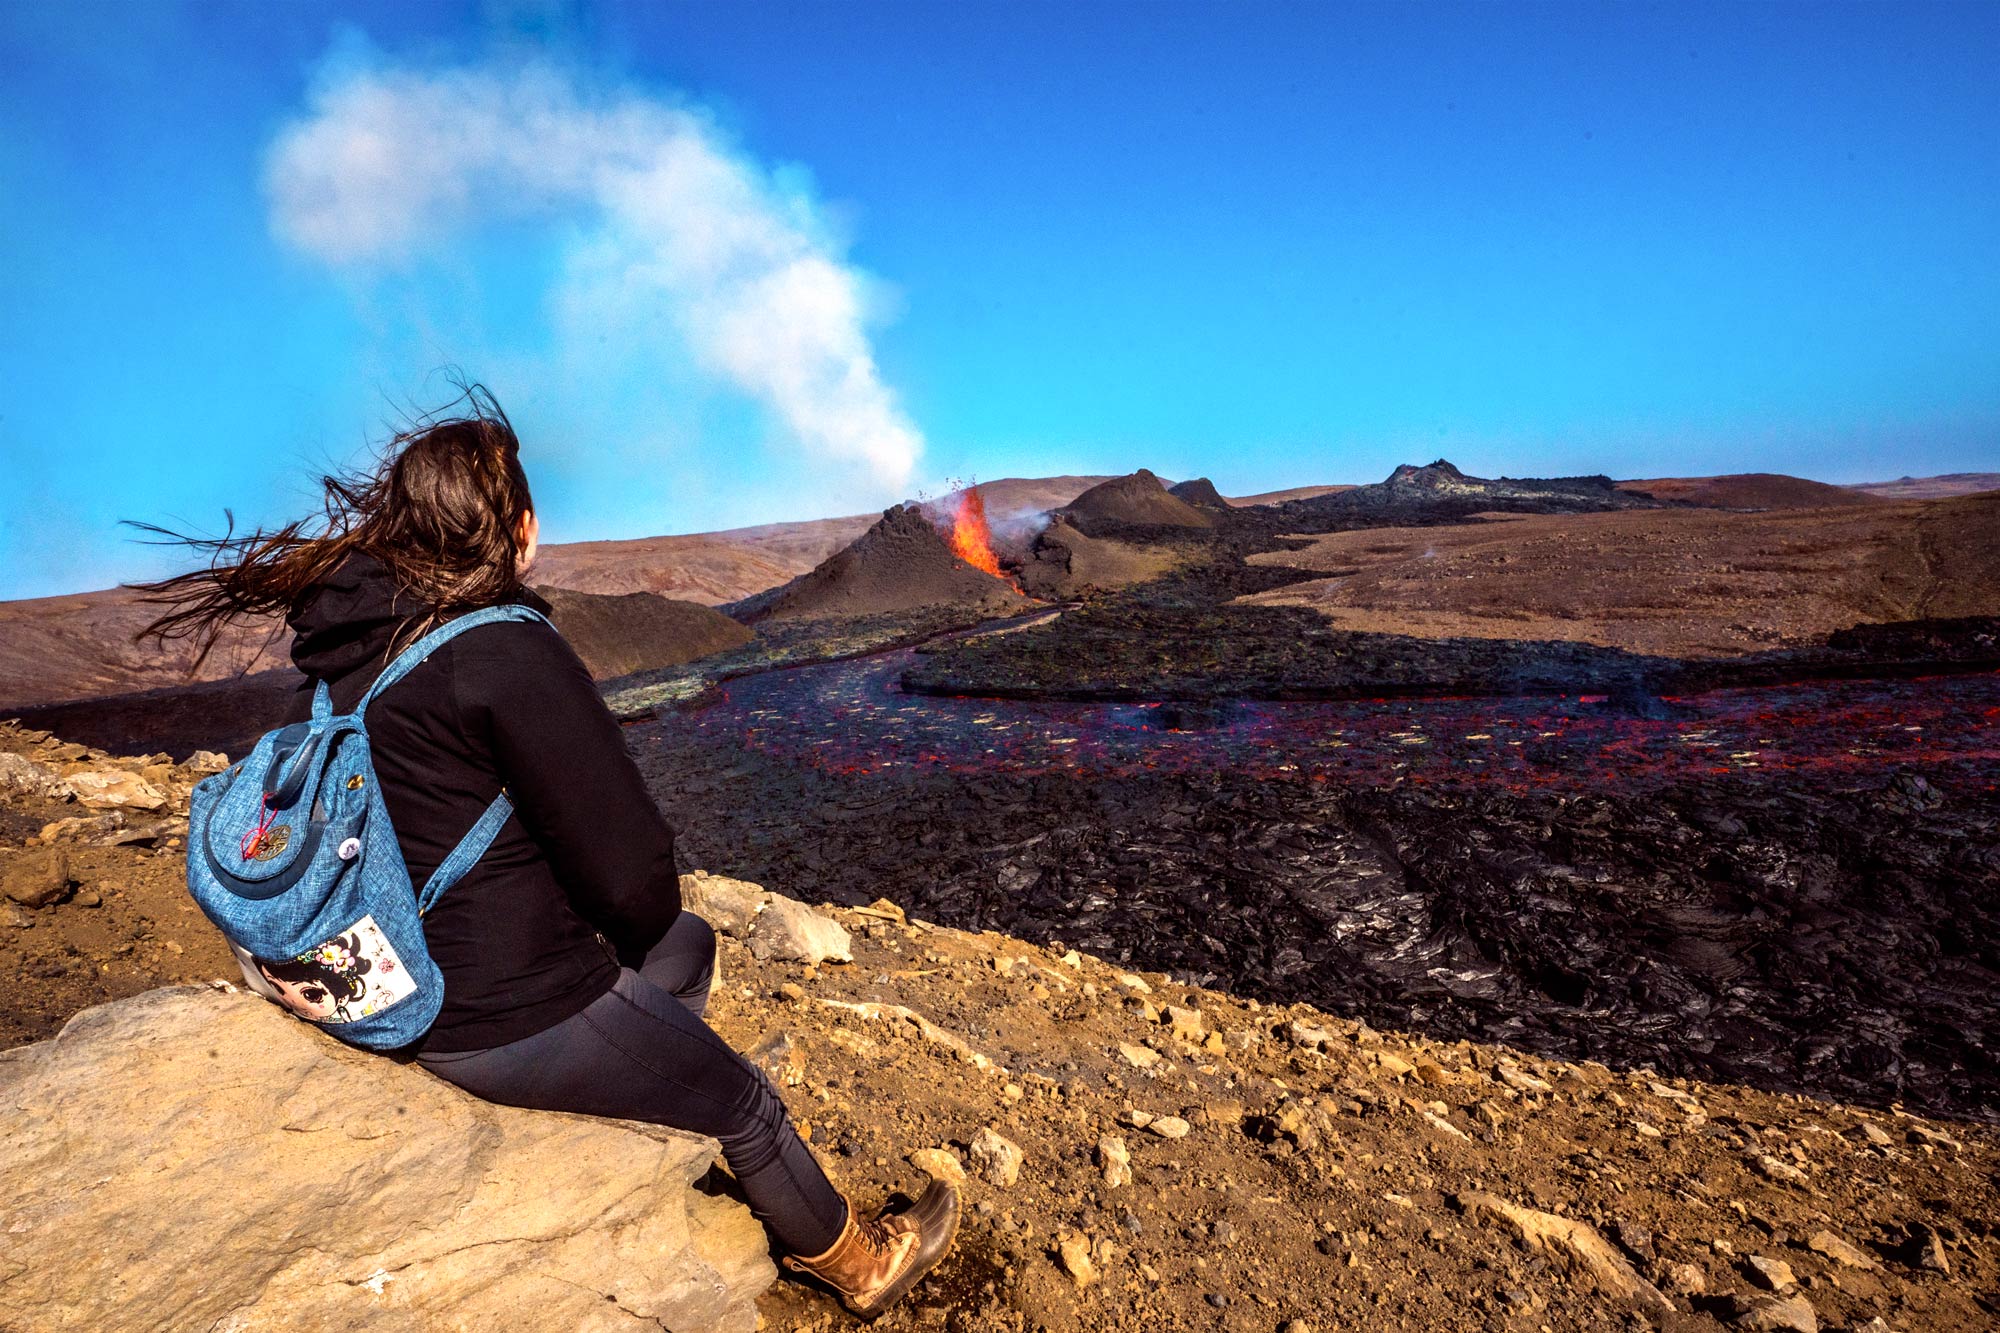 Girl sitting and watching an active volcano eruption